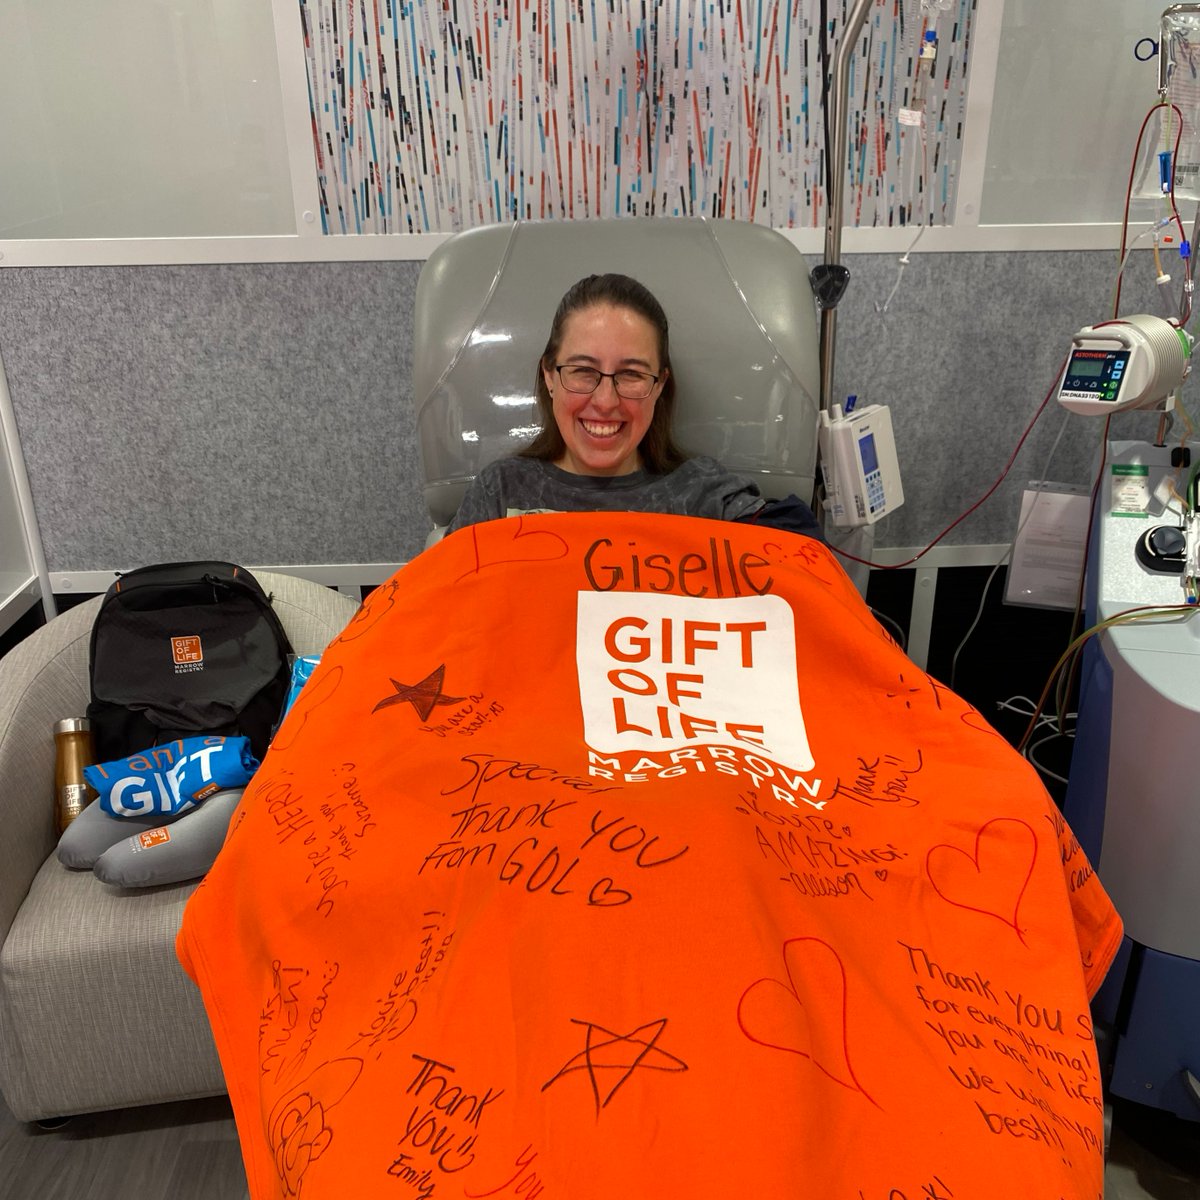 Today's hero is Giselle!

This recent graduate of vet tech school donated stem cells with us to help cure a patient battling blood cancer.

Giselle flew down to Florida with her best friend to #DonateInParadise.

Thank you hero!

#GOLHero #StemCellDonor